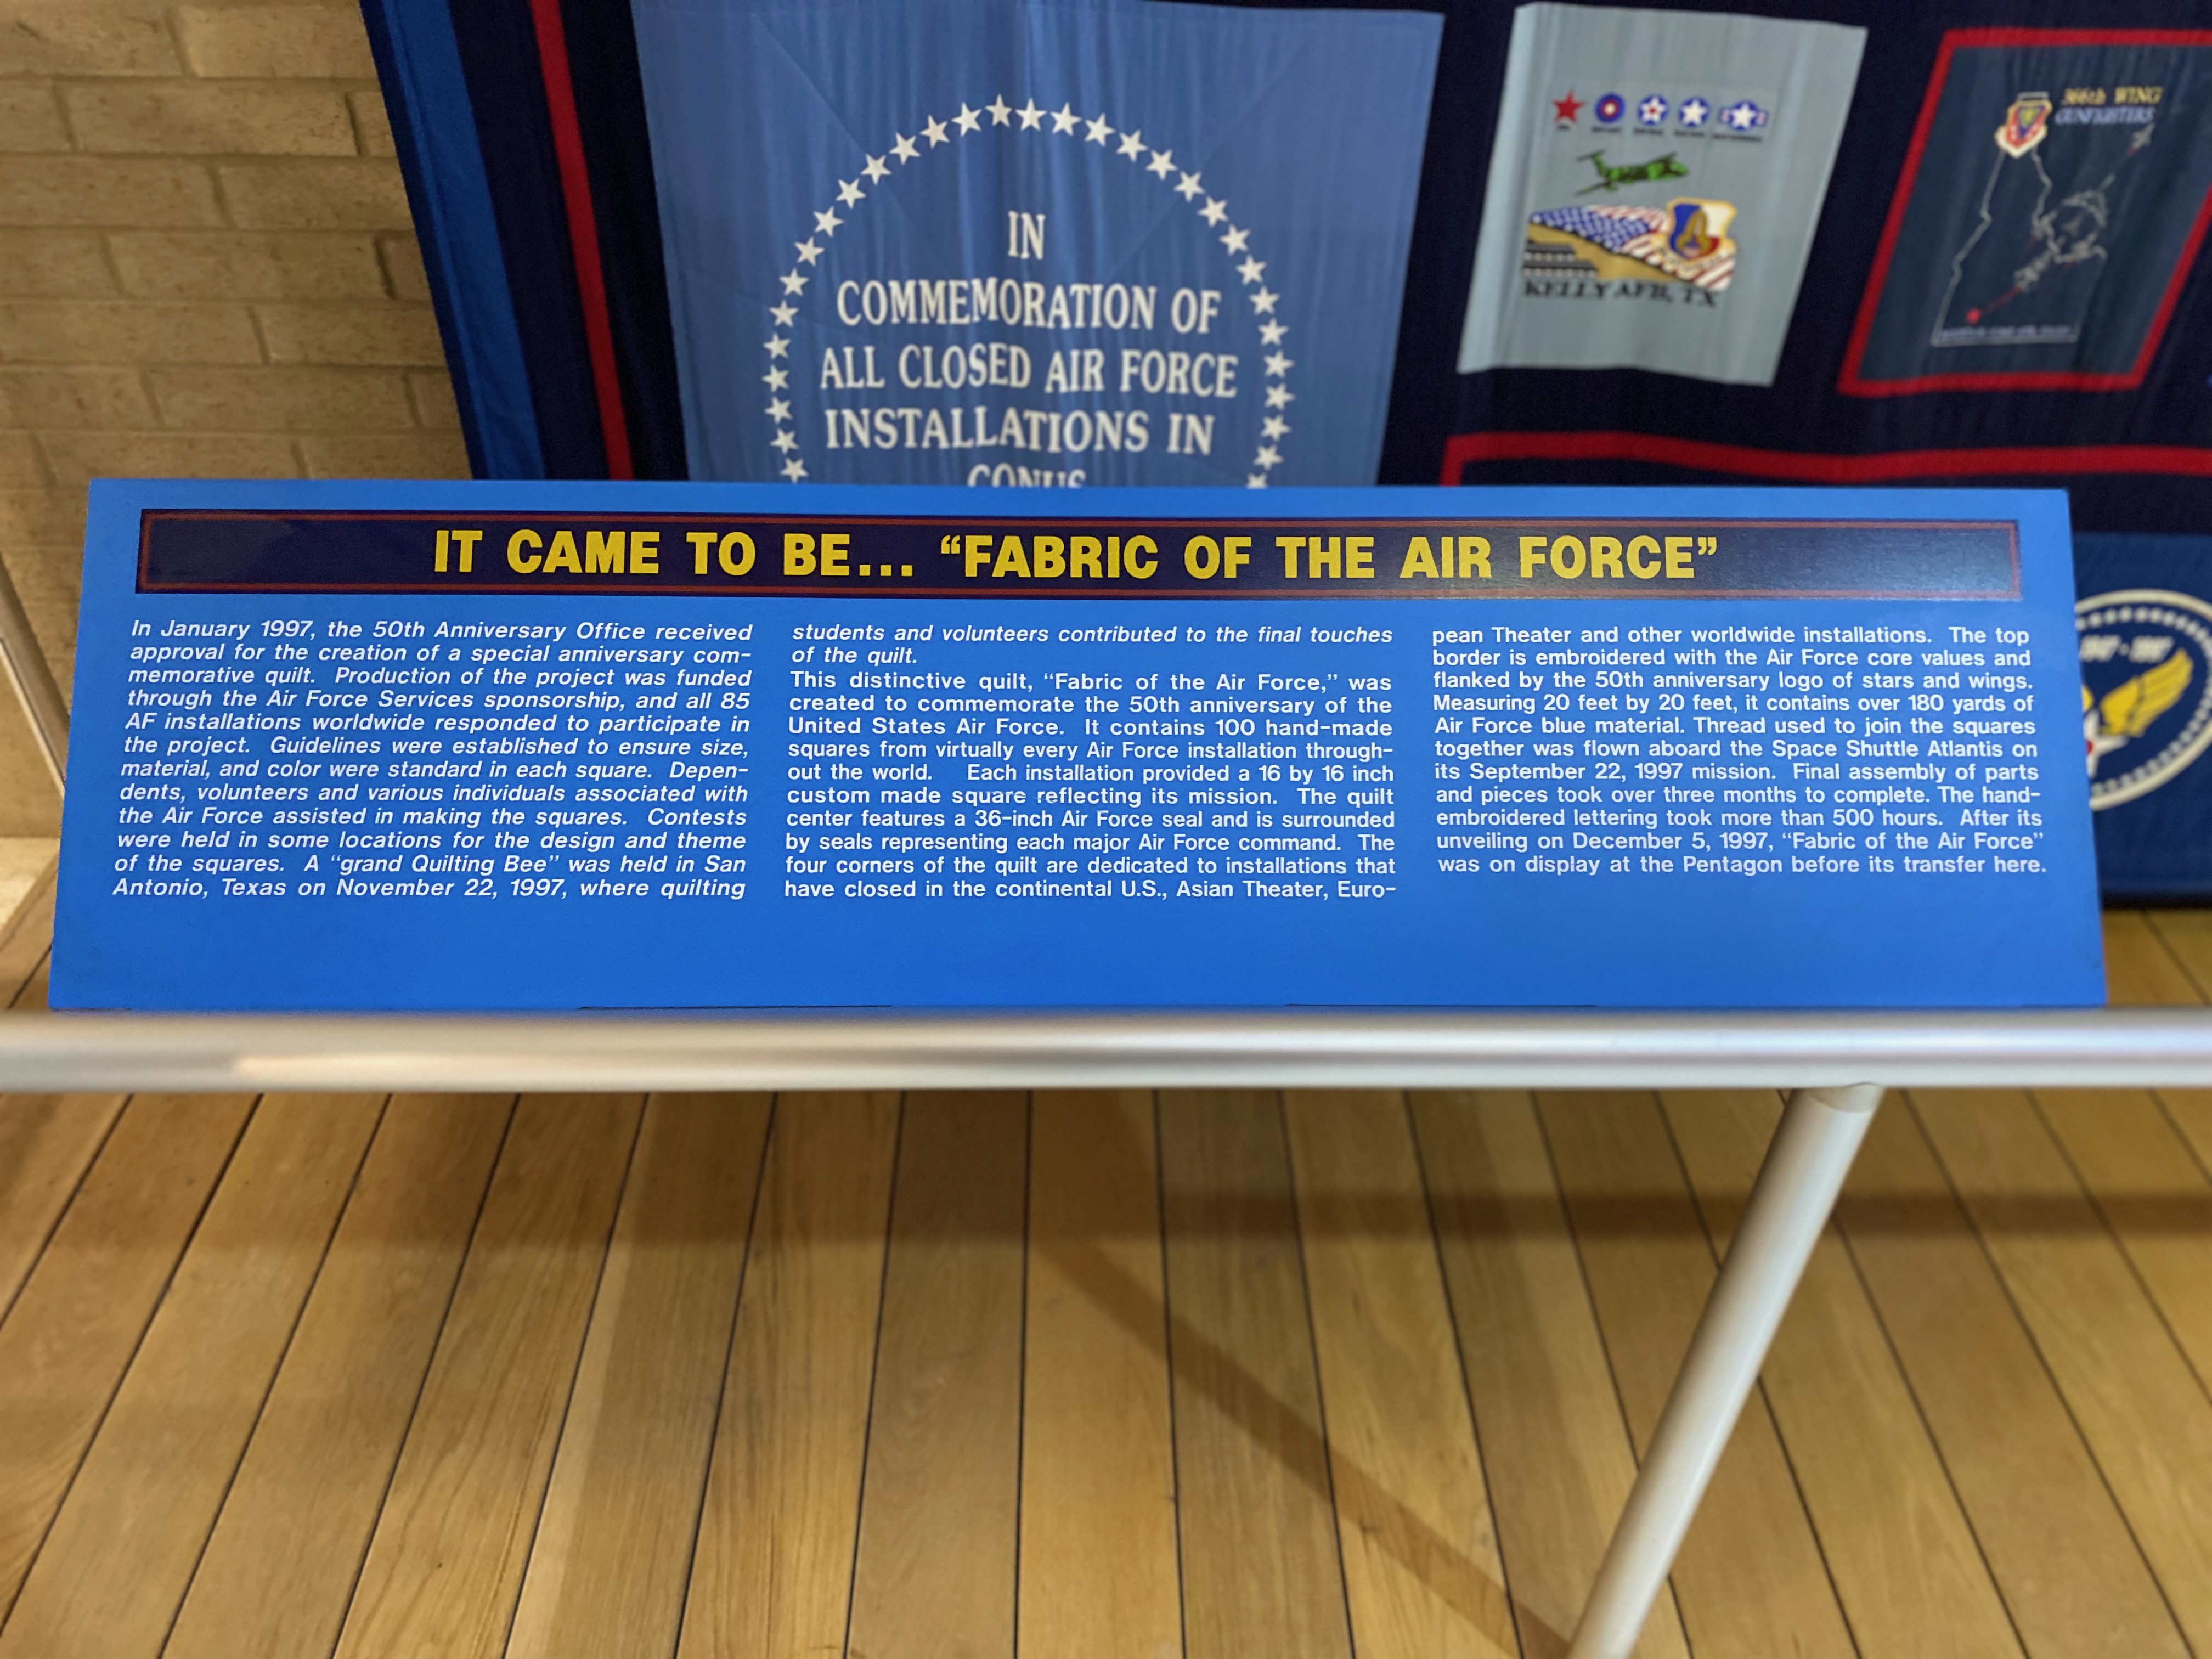 National Museum of the USAF - Exhibit Sign for the Air Force Commemorative Quilt - Image - Quiltblox.com